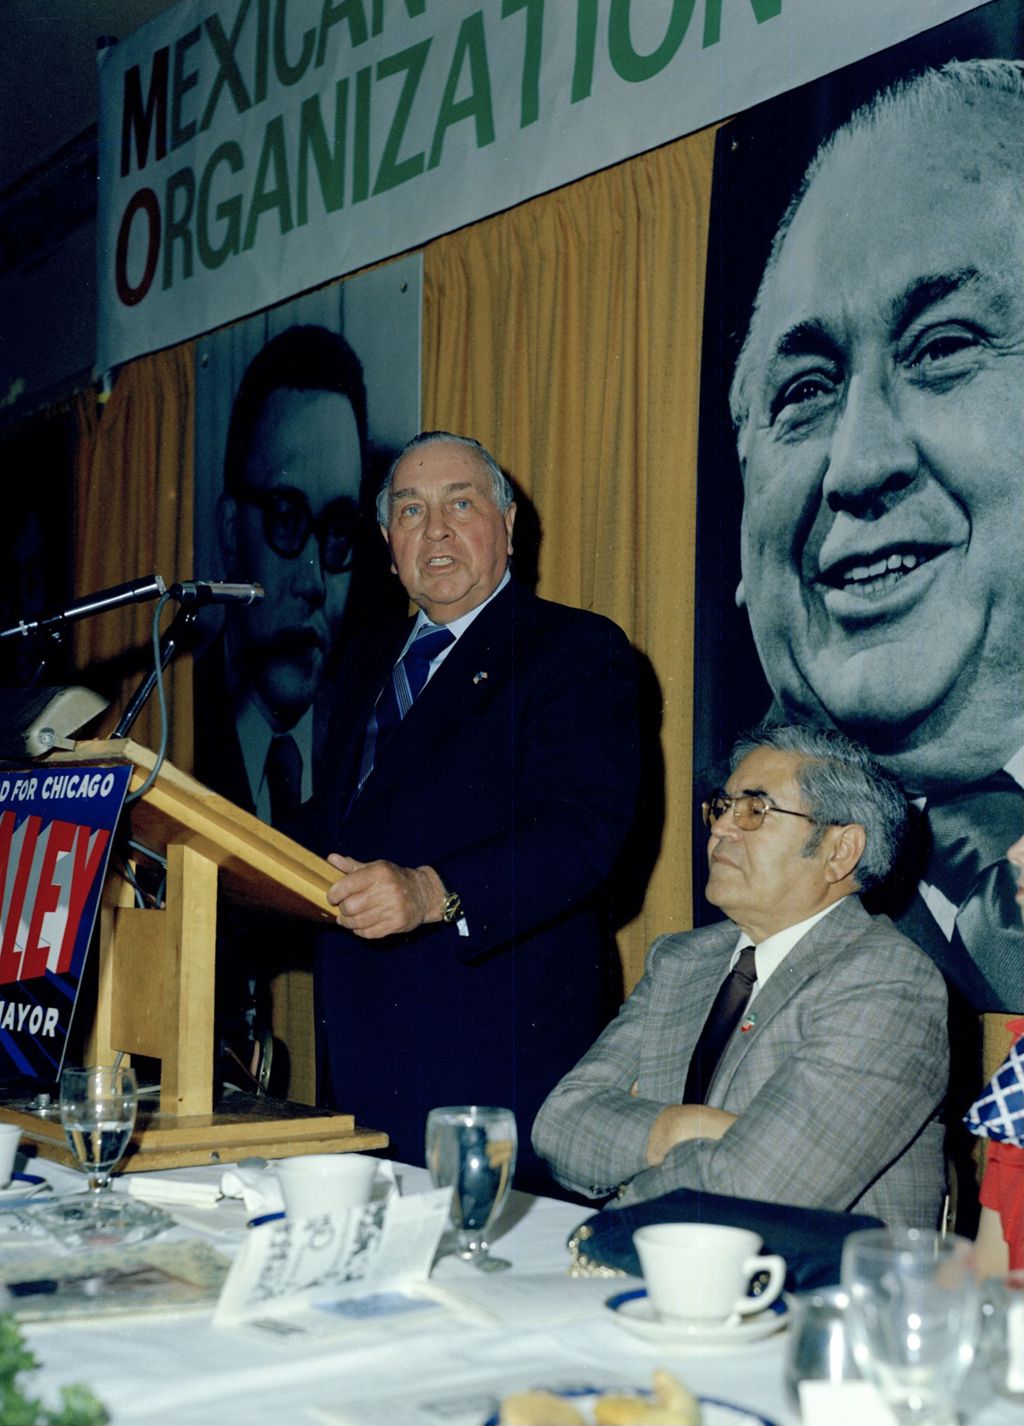 Richard J. Daley speaking at Mexican American Democratic Organization of Cook County banquet